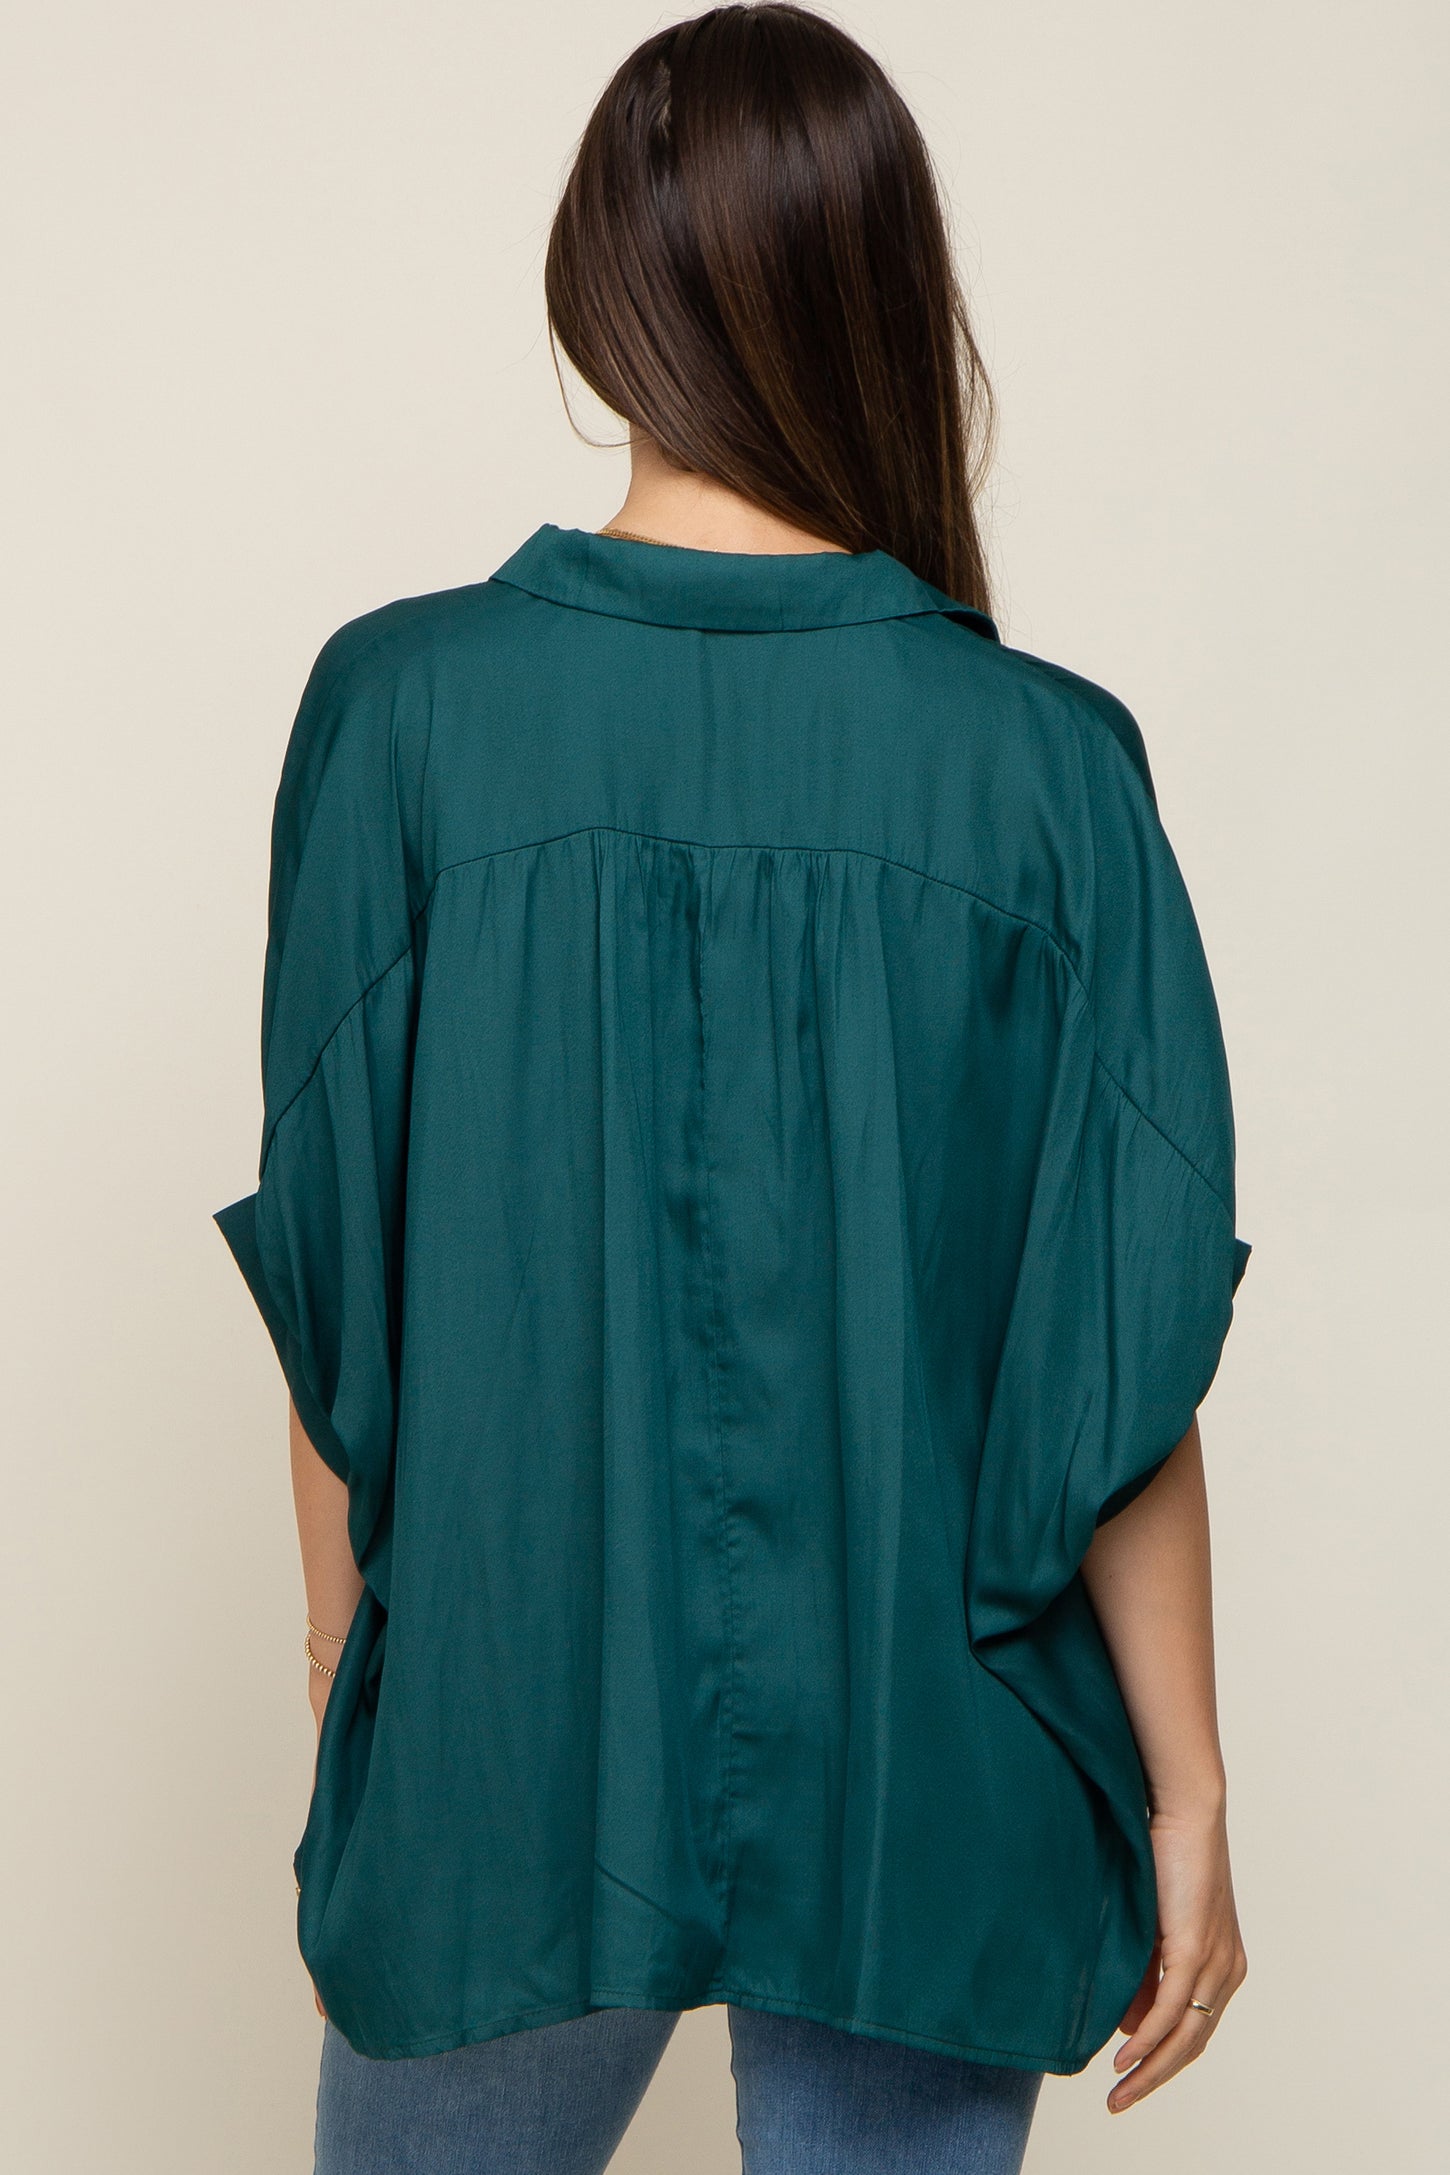 Green Oversized Button Down Maternity Blouse